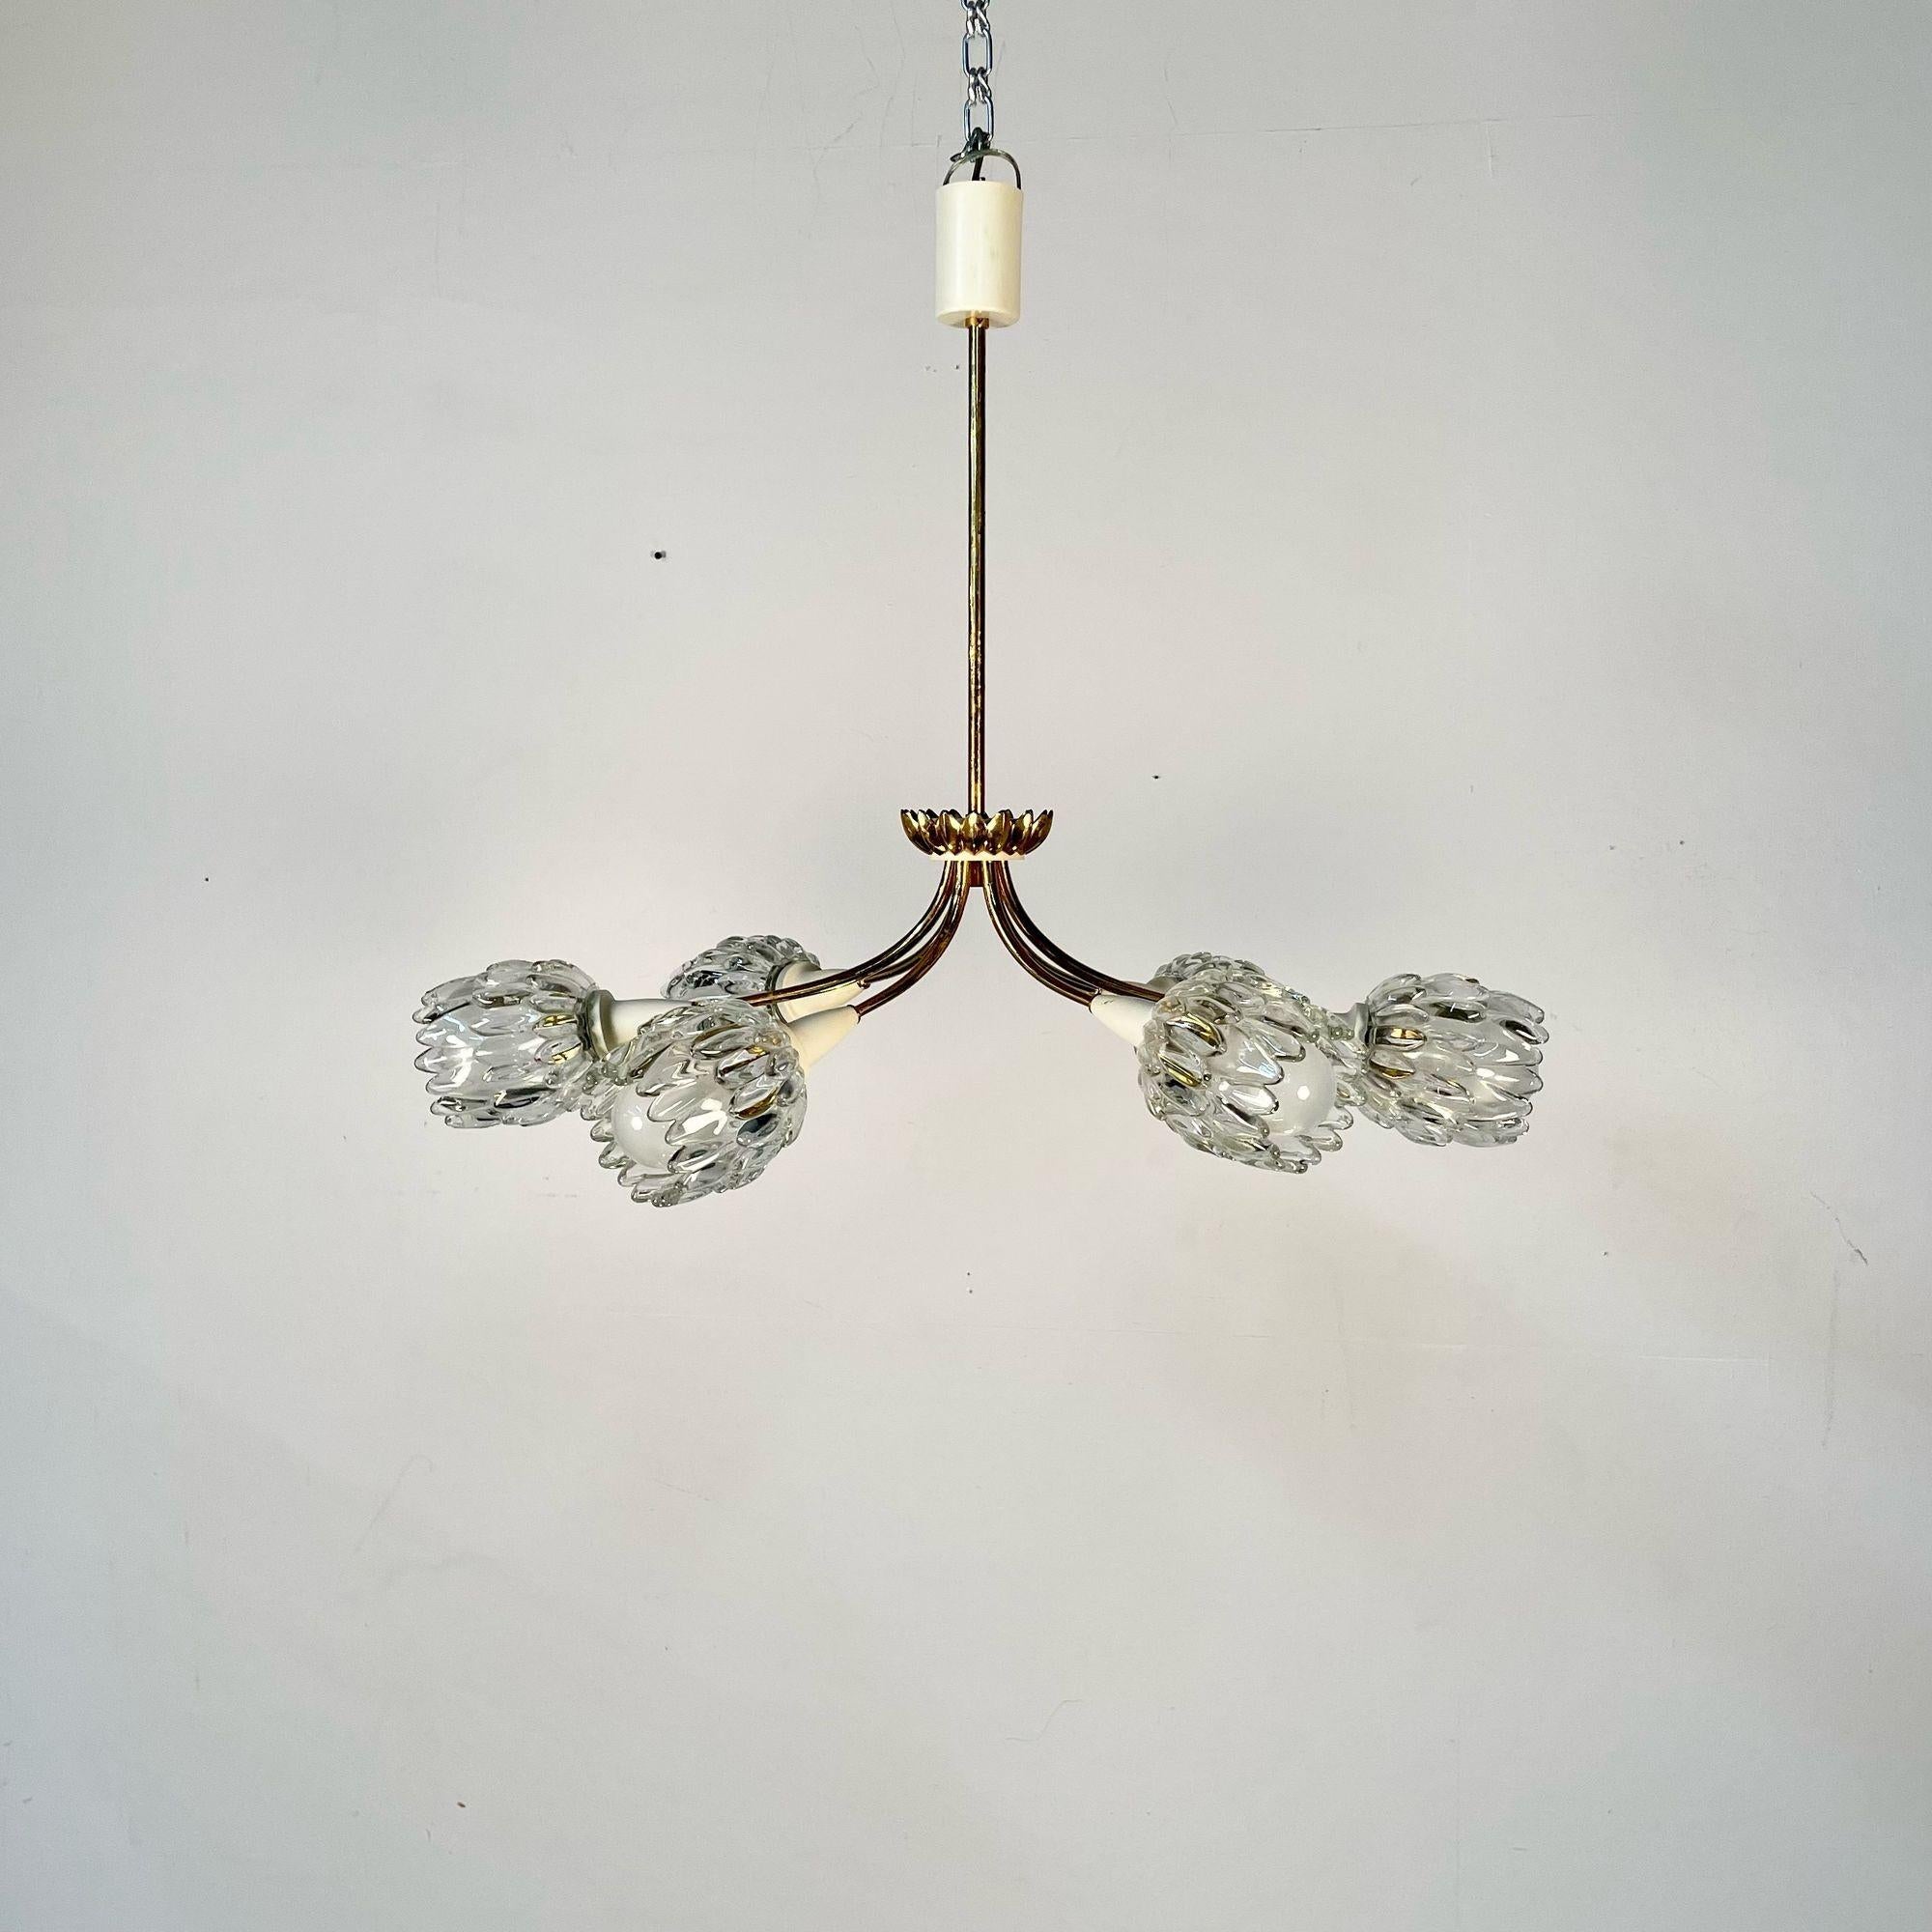 Mid-Century Modern, Six Light Chandelier, Textured Glass, Brass, Italy, 1980s For Sale 3